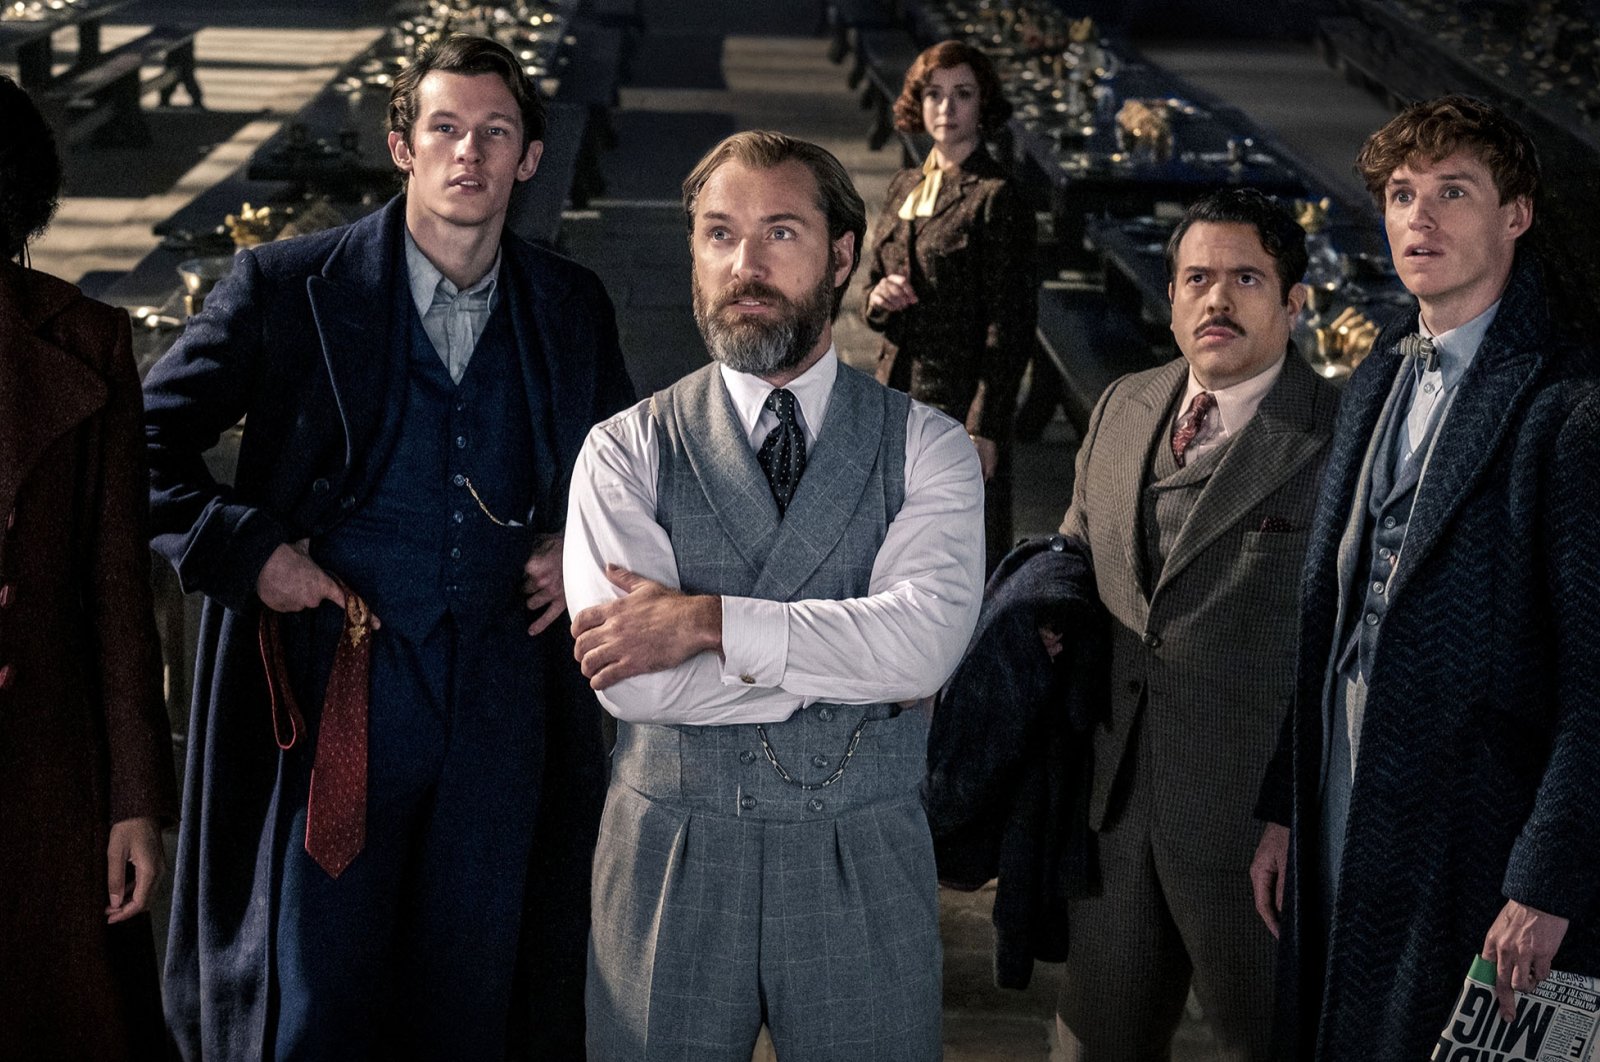 From left Jessica Williams, Callum Turner, Jude Law, Fionna Glascott, Dan Fogler and Eddie Redmayne, in a scene from the film &quot;Fantastic Beasts: The Secrets of Dumbledore.&quot; (Warner Bros. Pictures via AP)